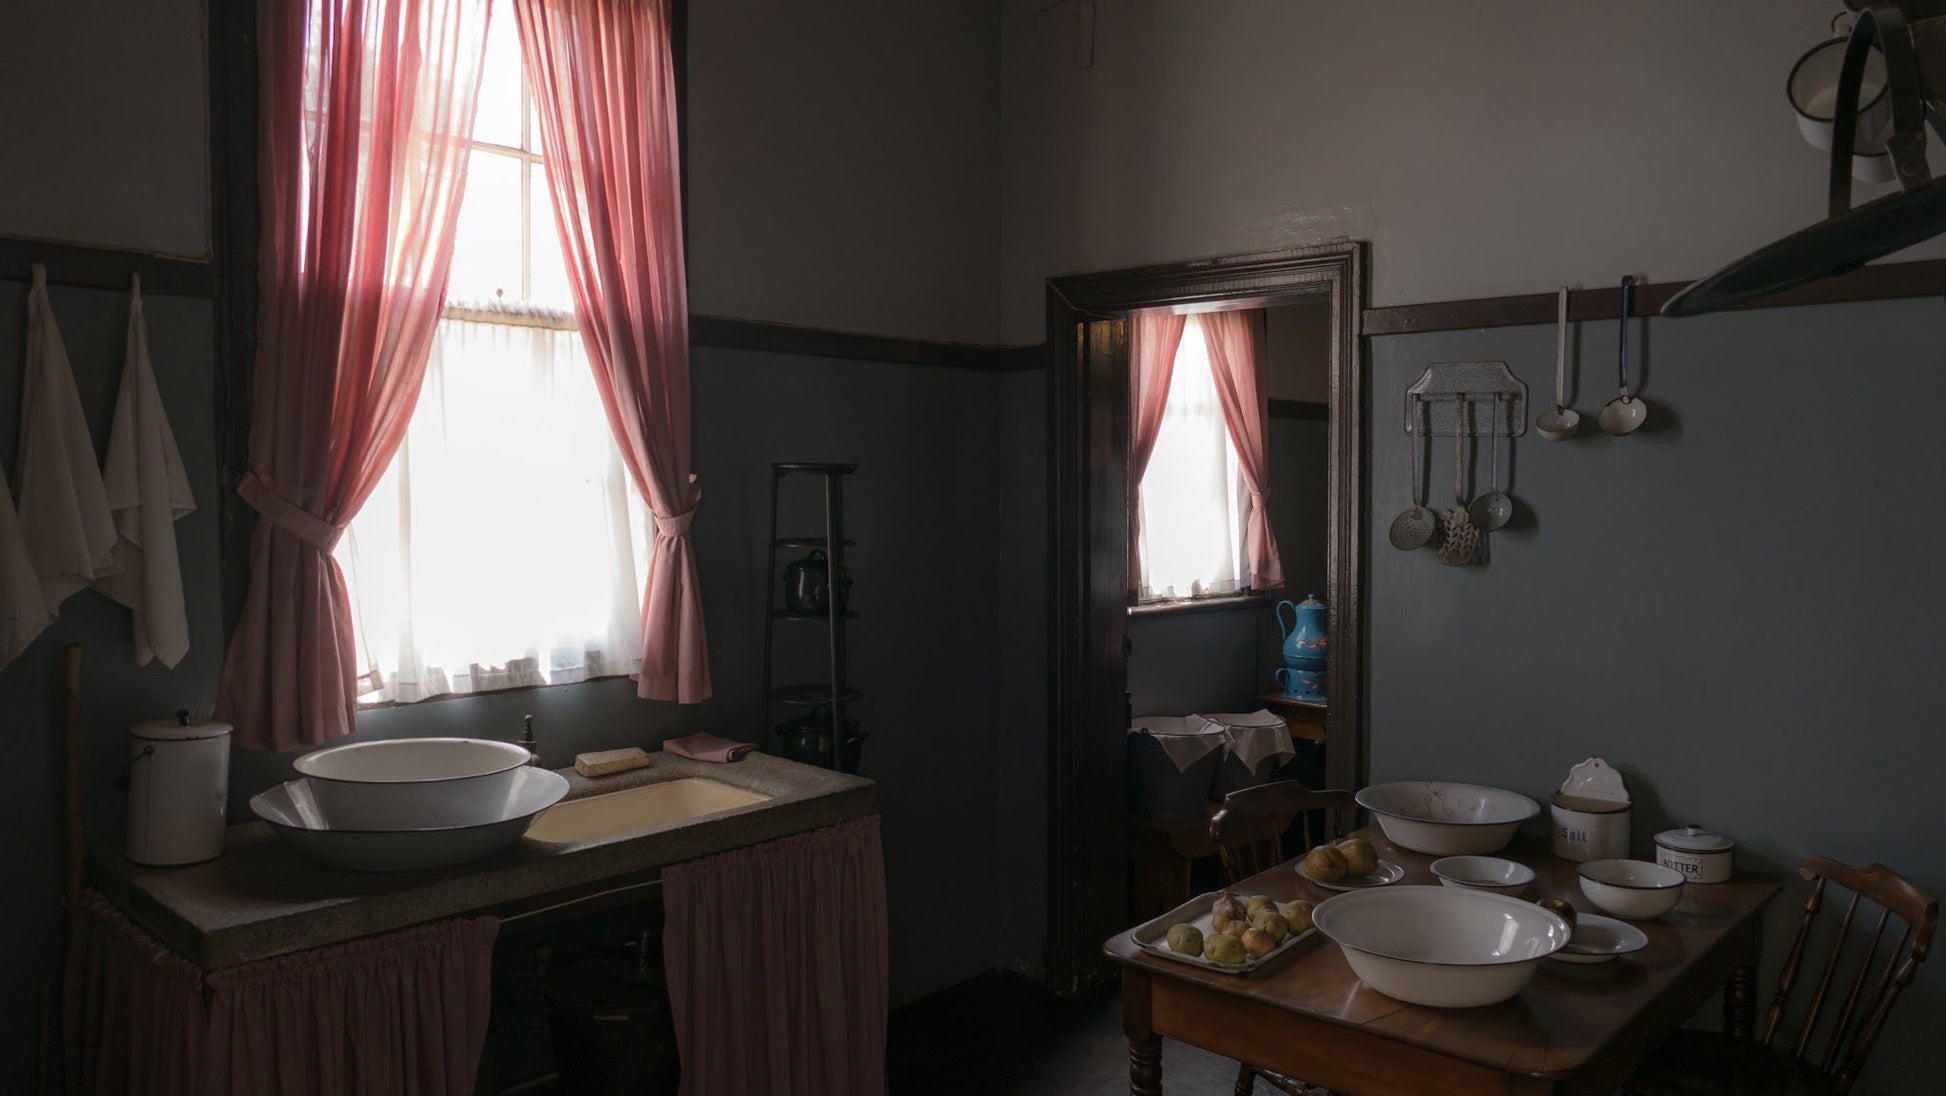  Paul Kruger Country House Museum